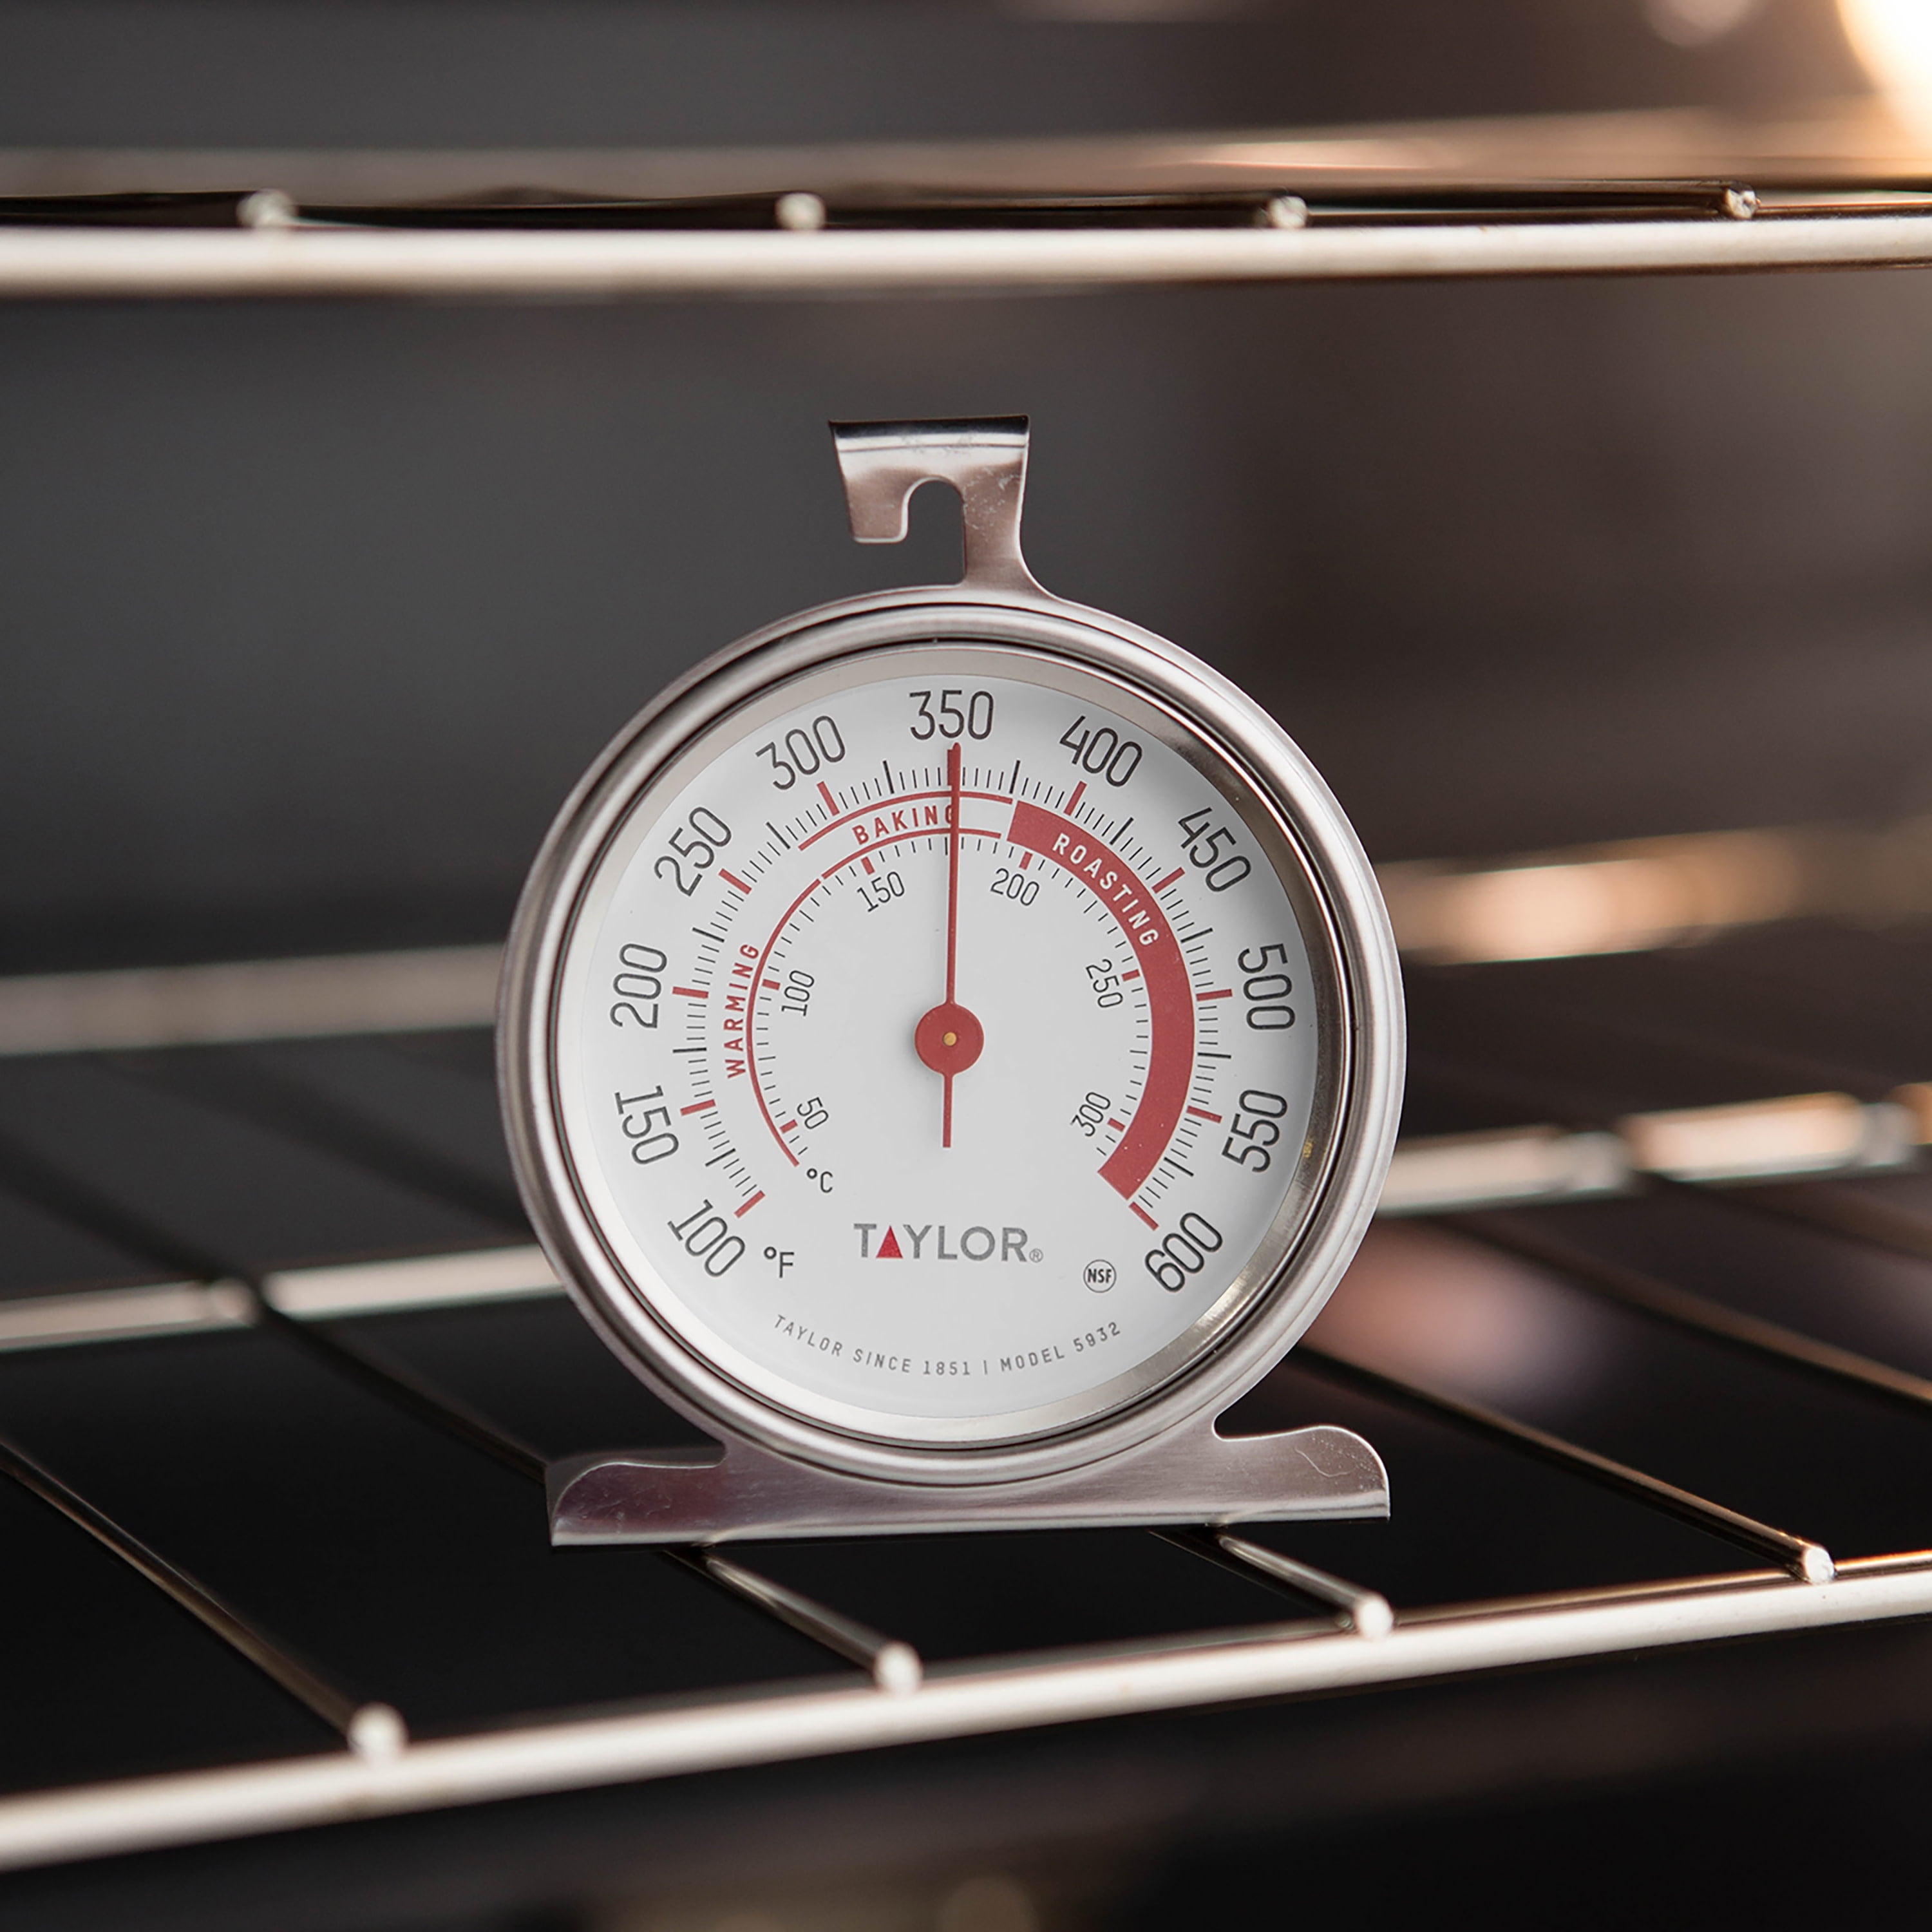 Taylor 3506 2 1/2 Dial Oven Thermometer